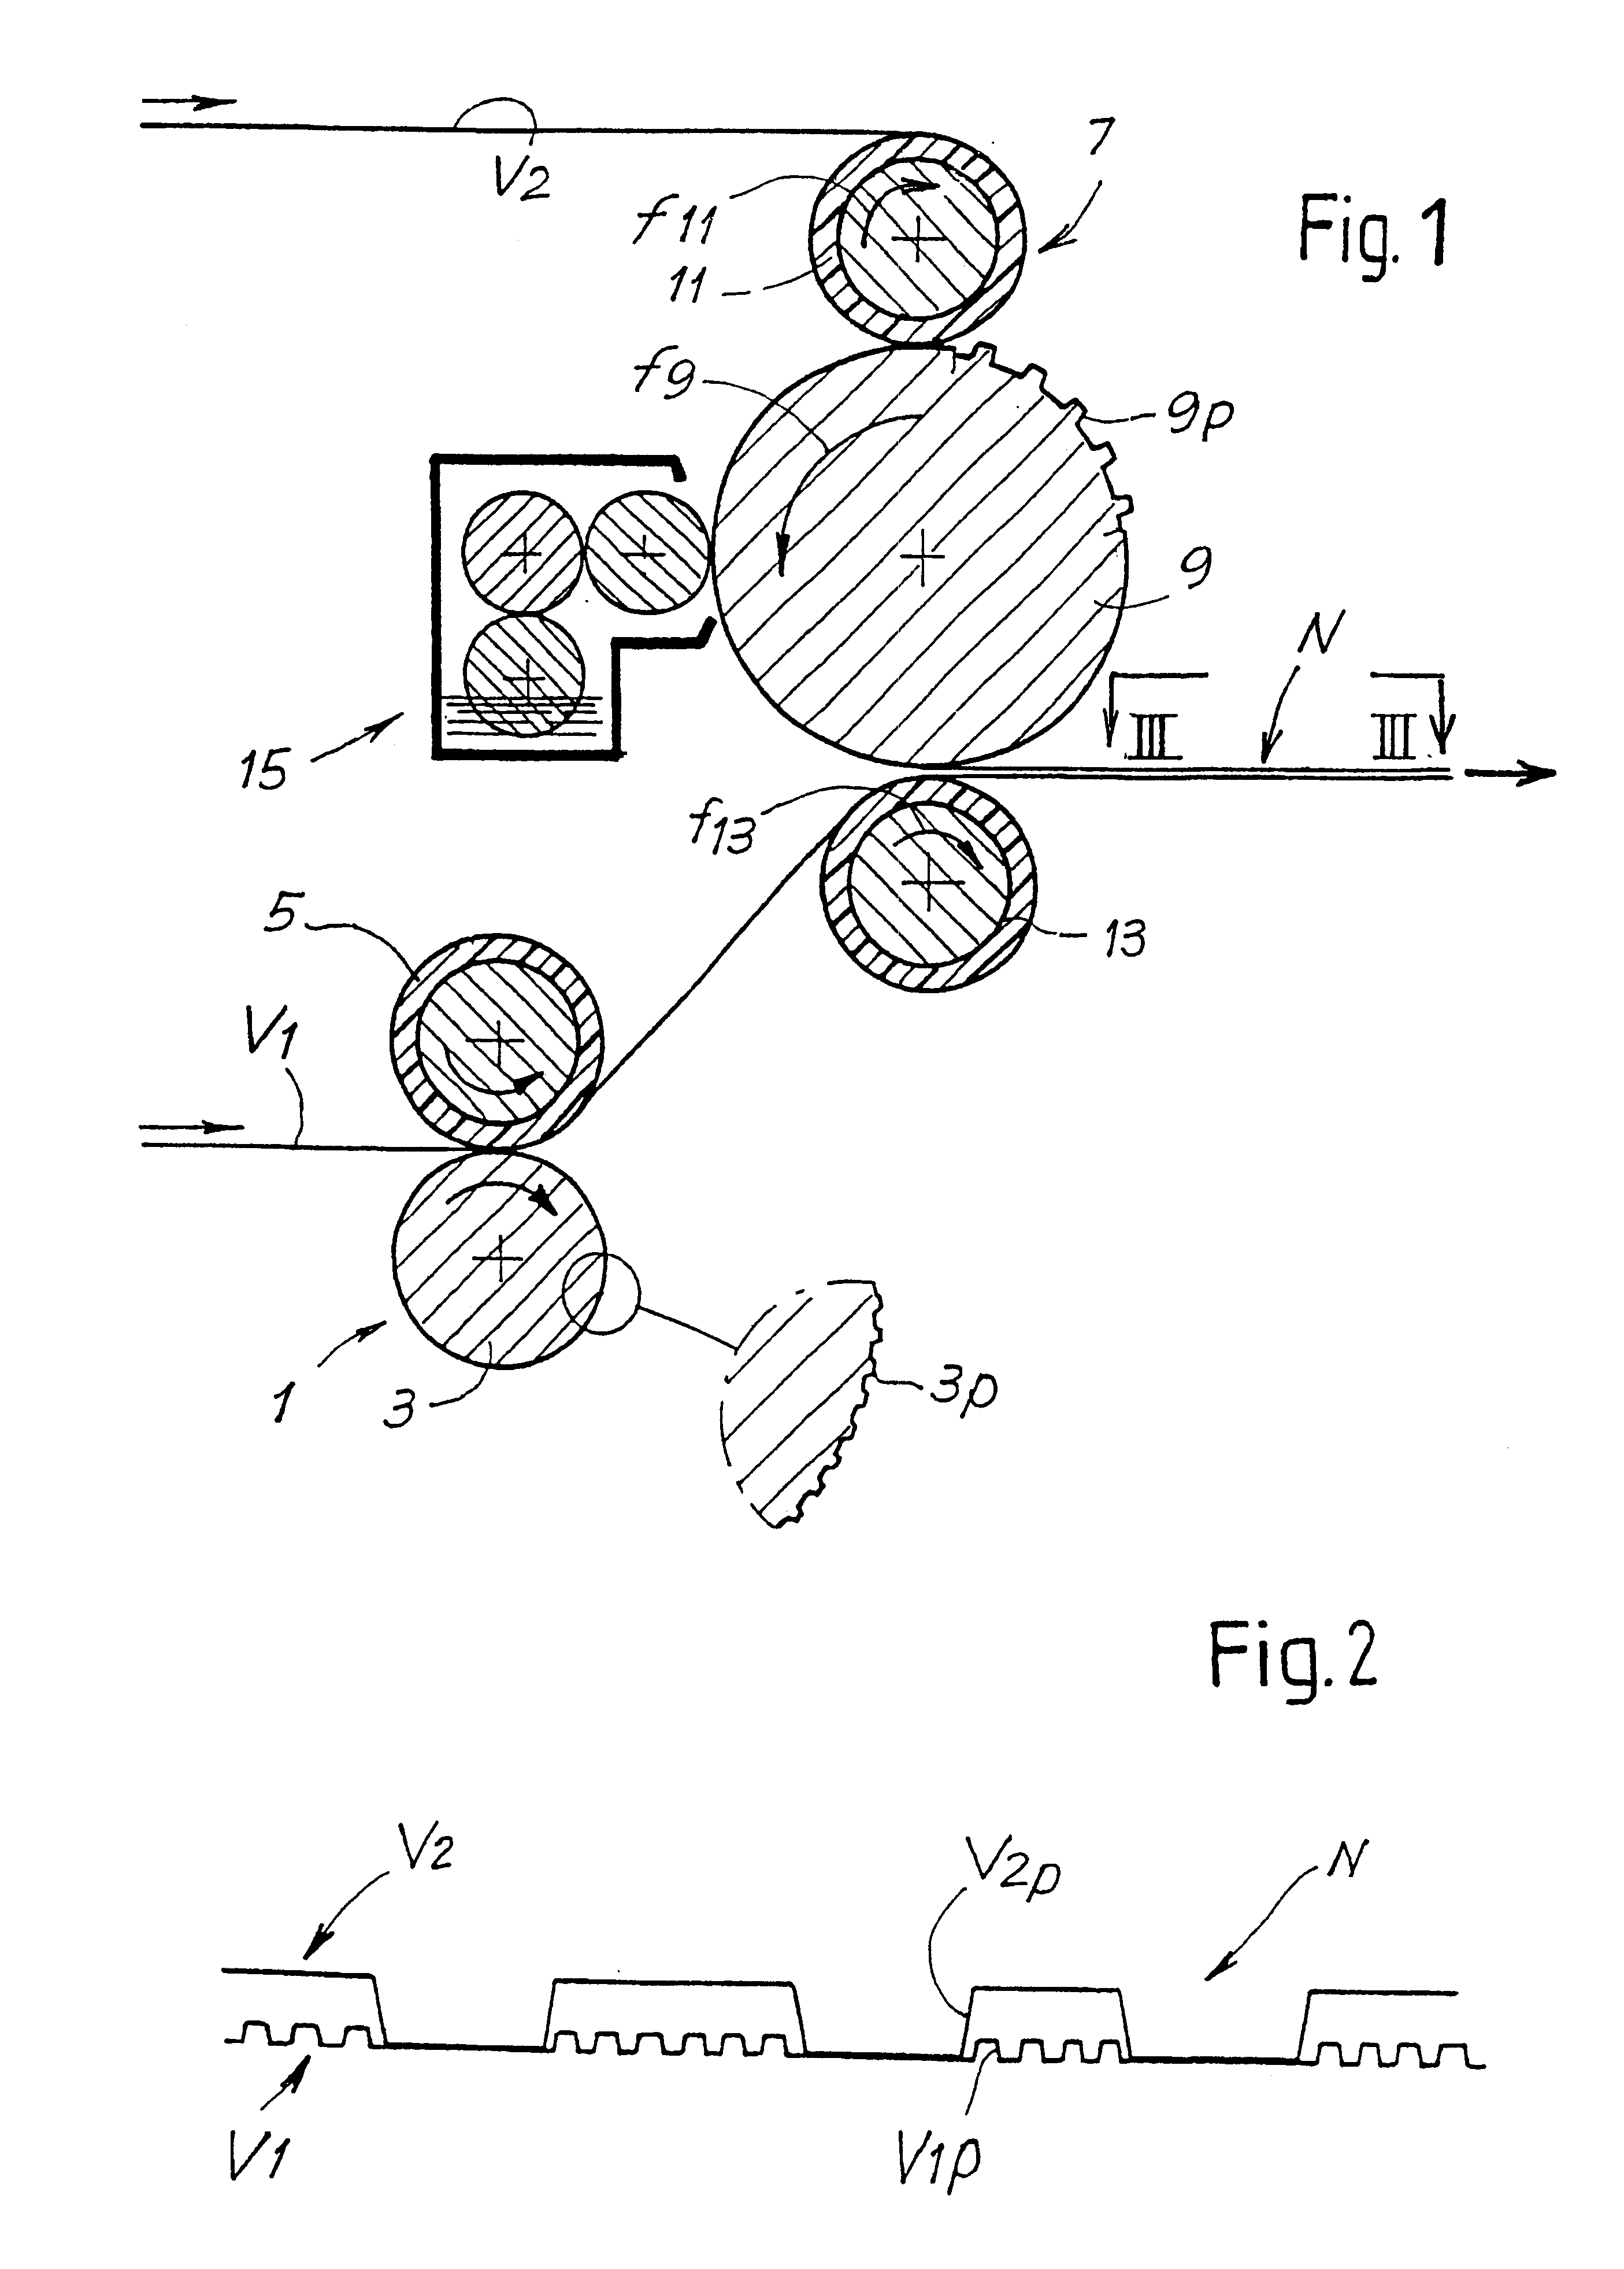 Device for the production of multi-ply web material with different size and density patterns on different plies